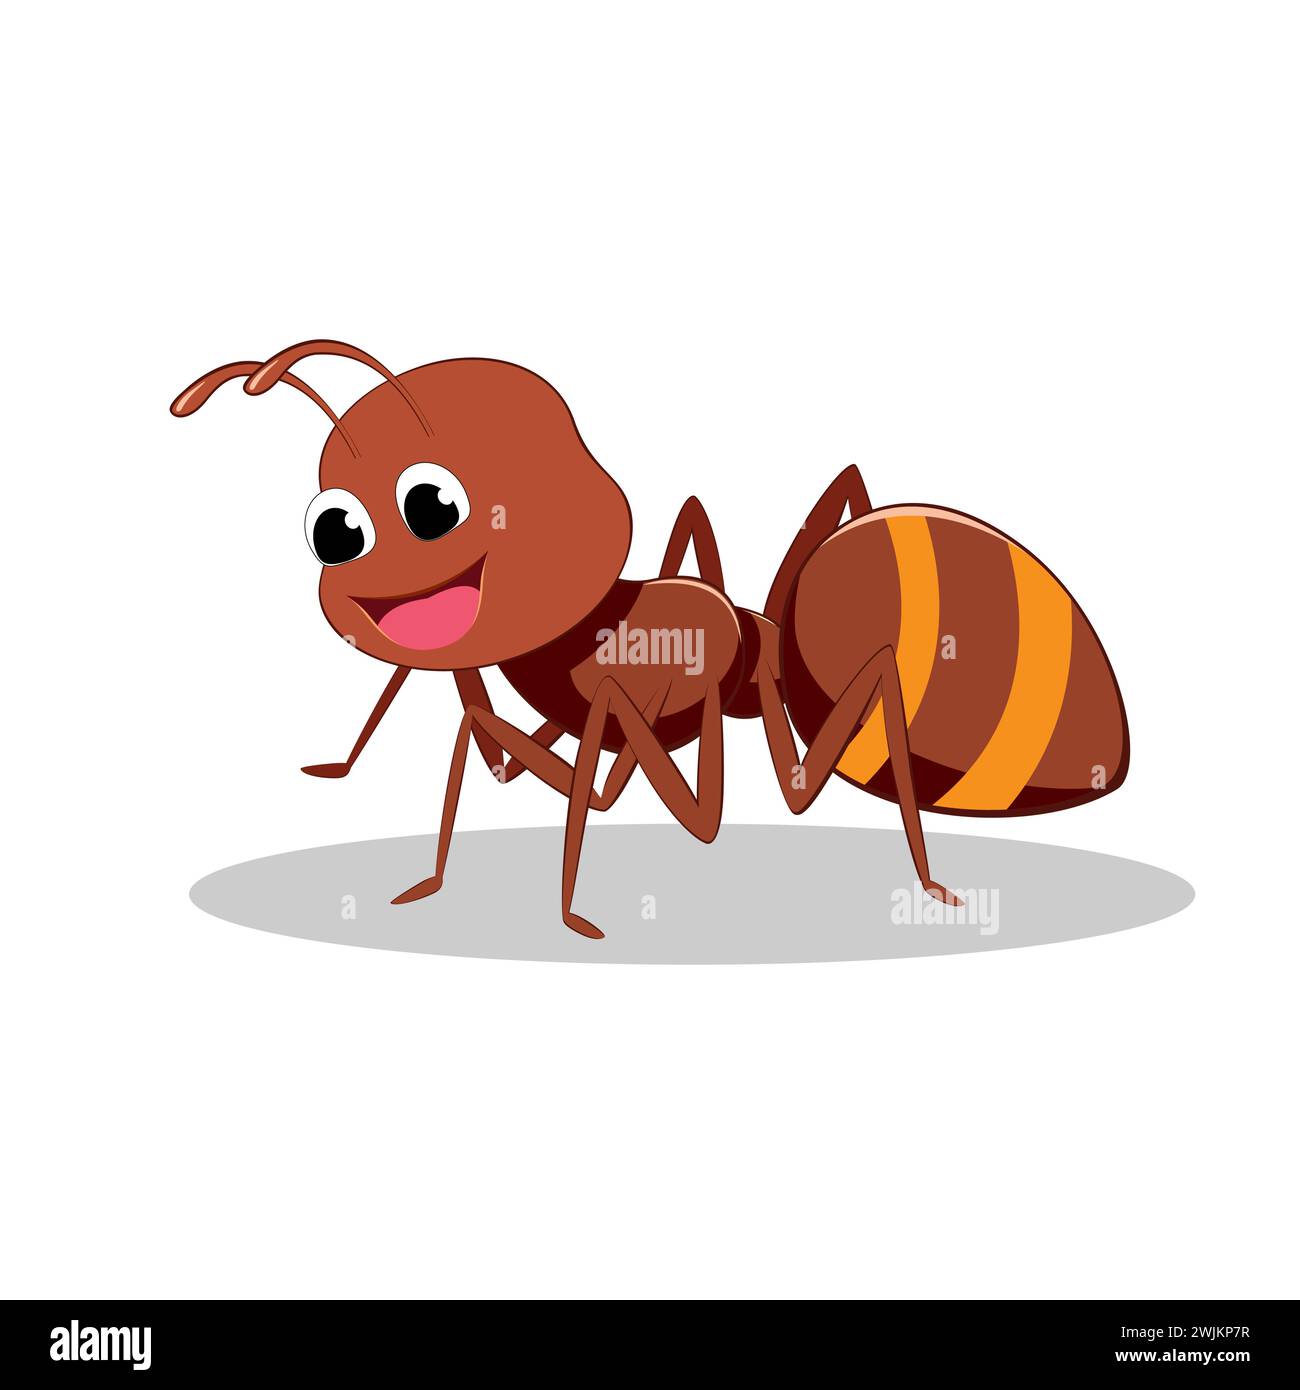 art illustration symbol mascot animal icon design nature concept insect of ant Stock Vector